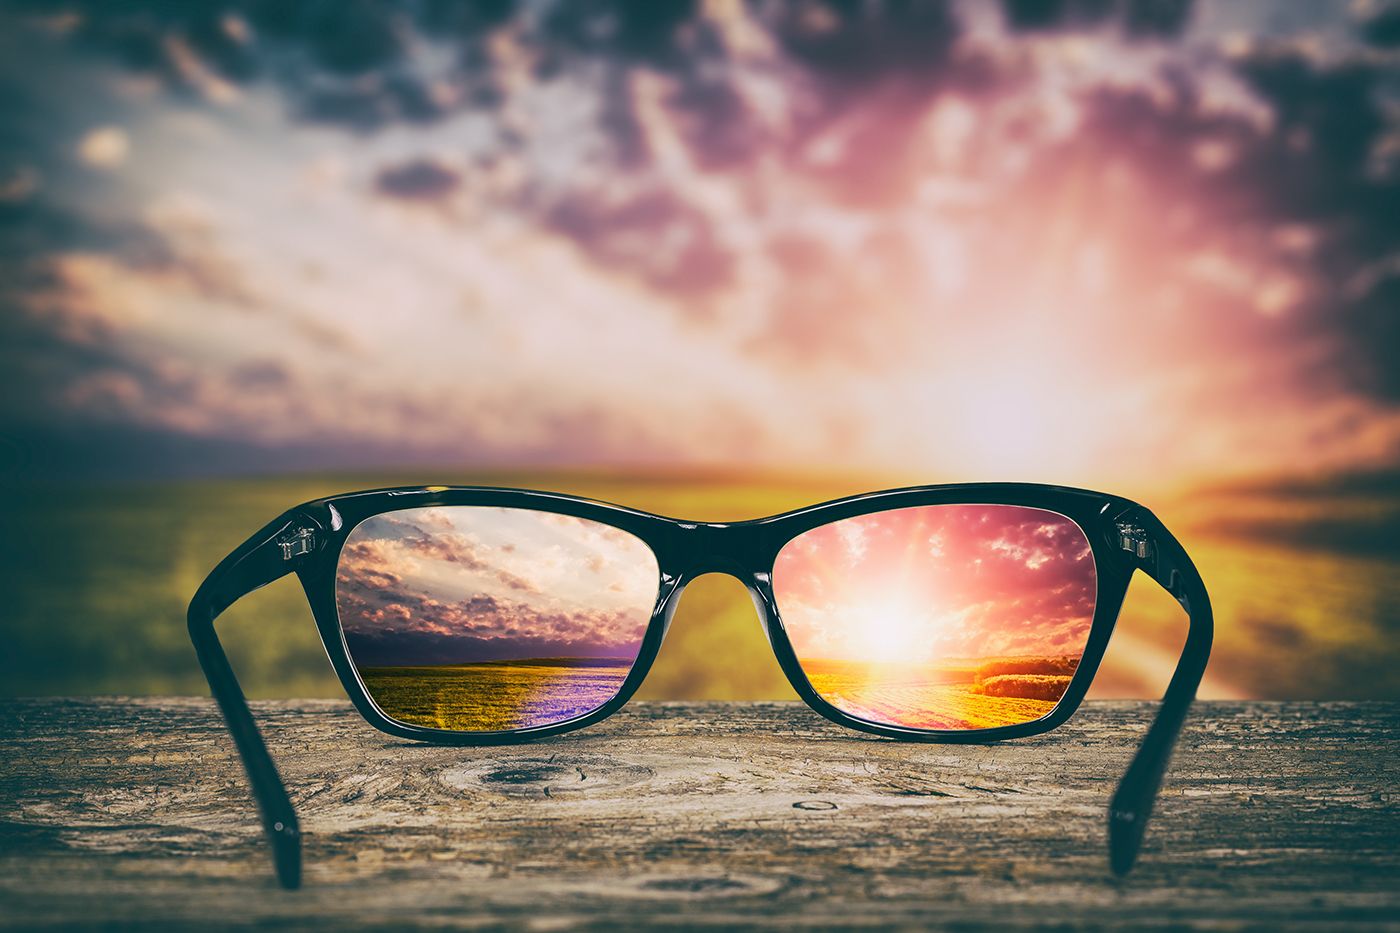 An out-of-focus view of a sunrise, with a focused version in the lenses of a pair of spectacles.